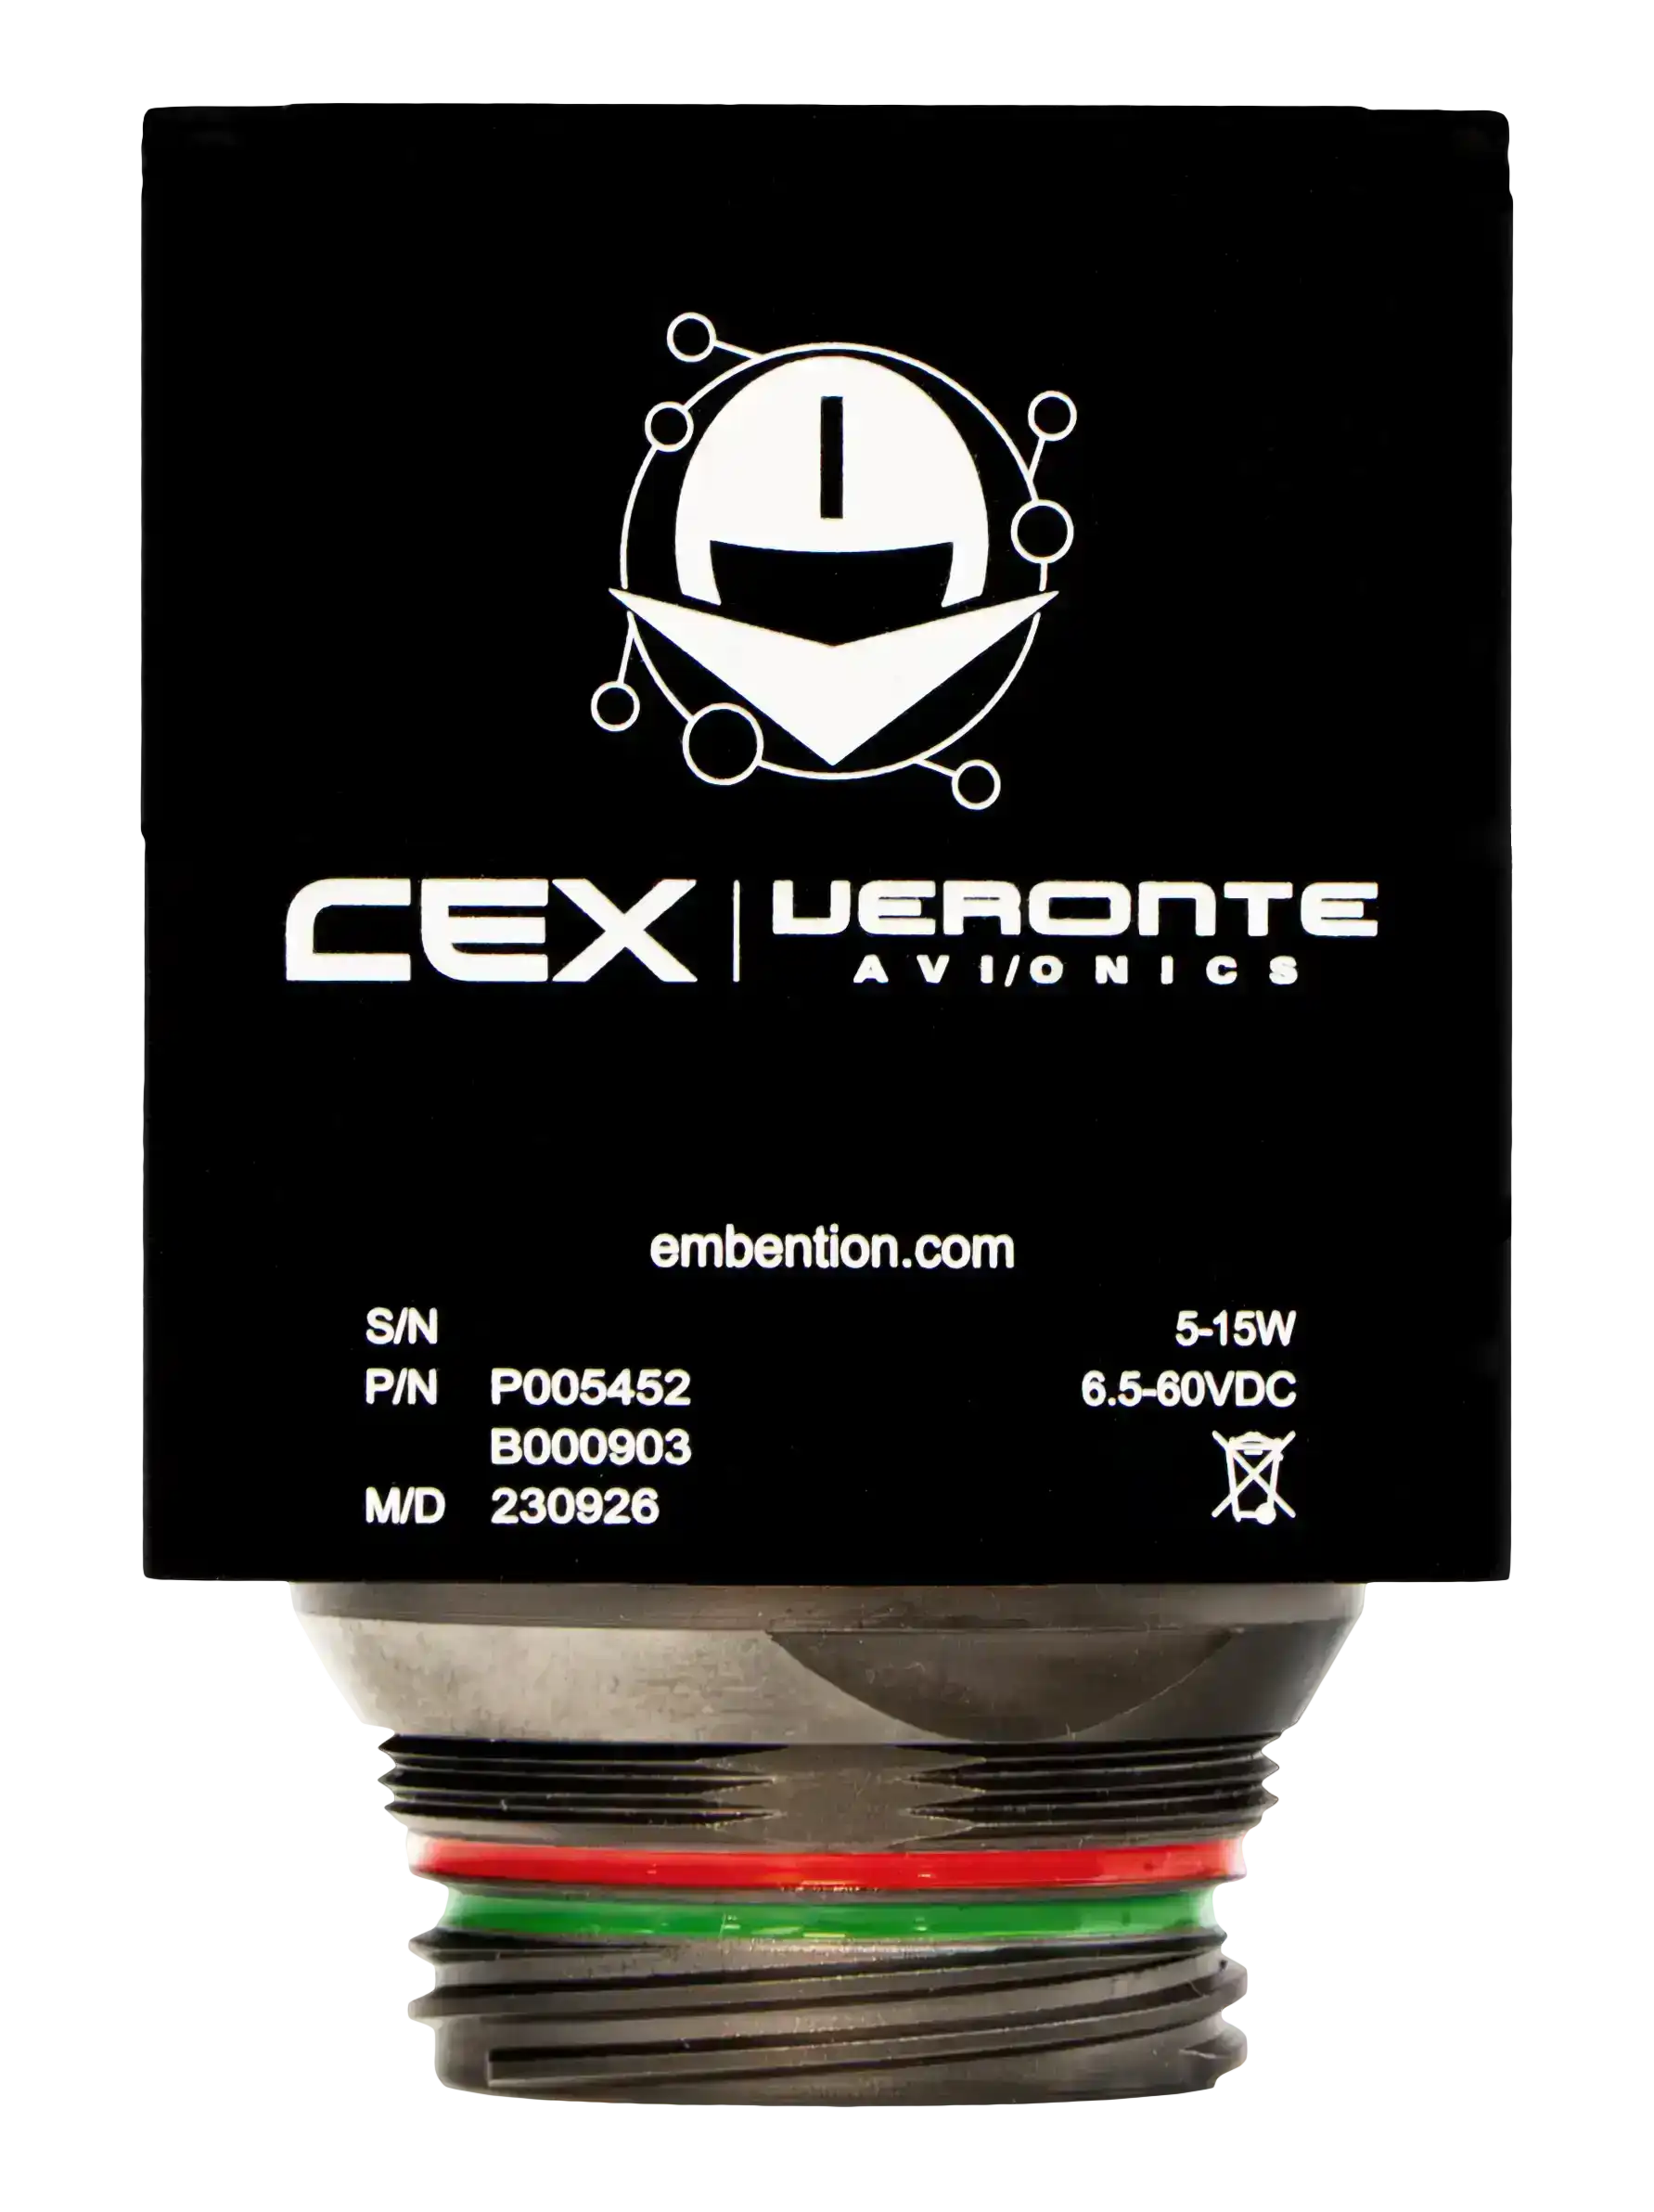 The image displays an aviation circular connector labeled "CEX | Veronte Avionics" from Embention, featuring a black design with white labeling and color-coded wiring